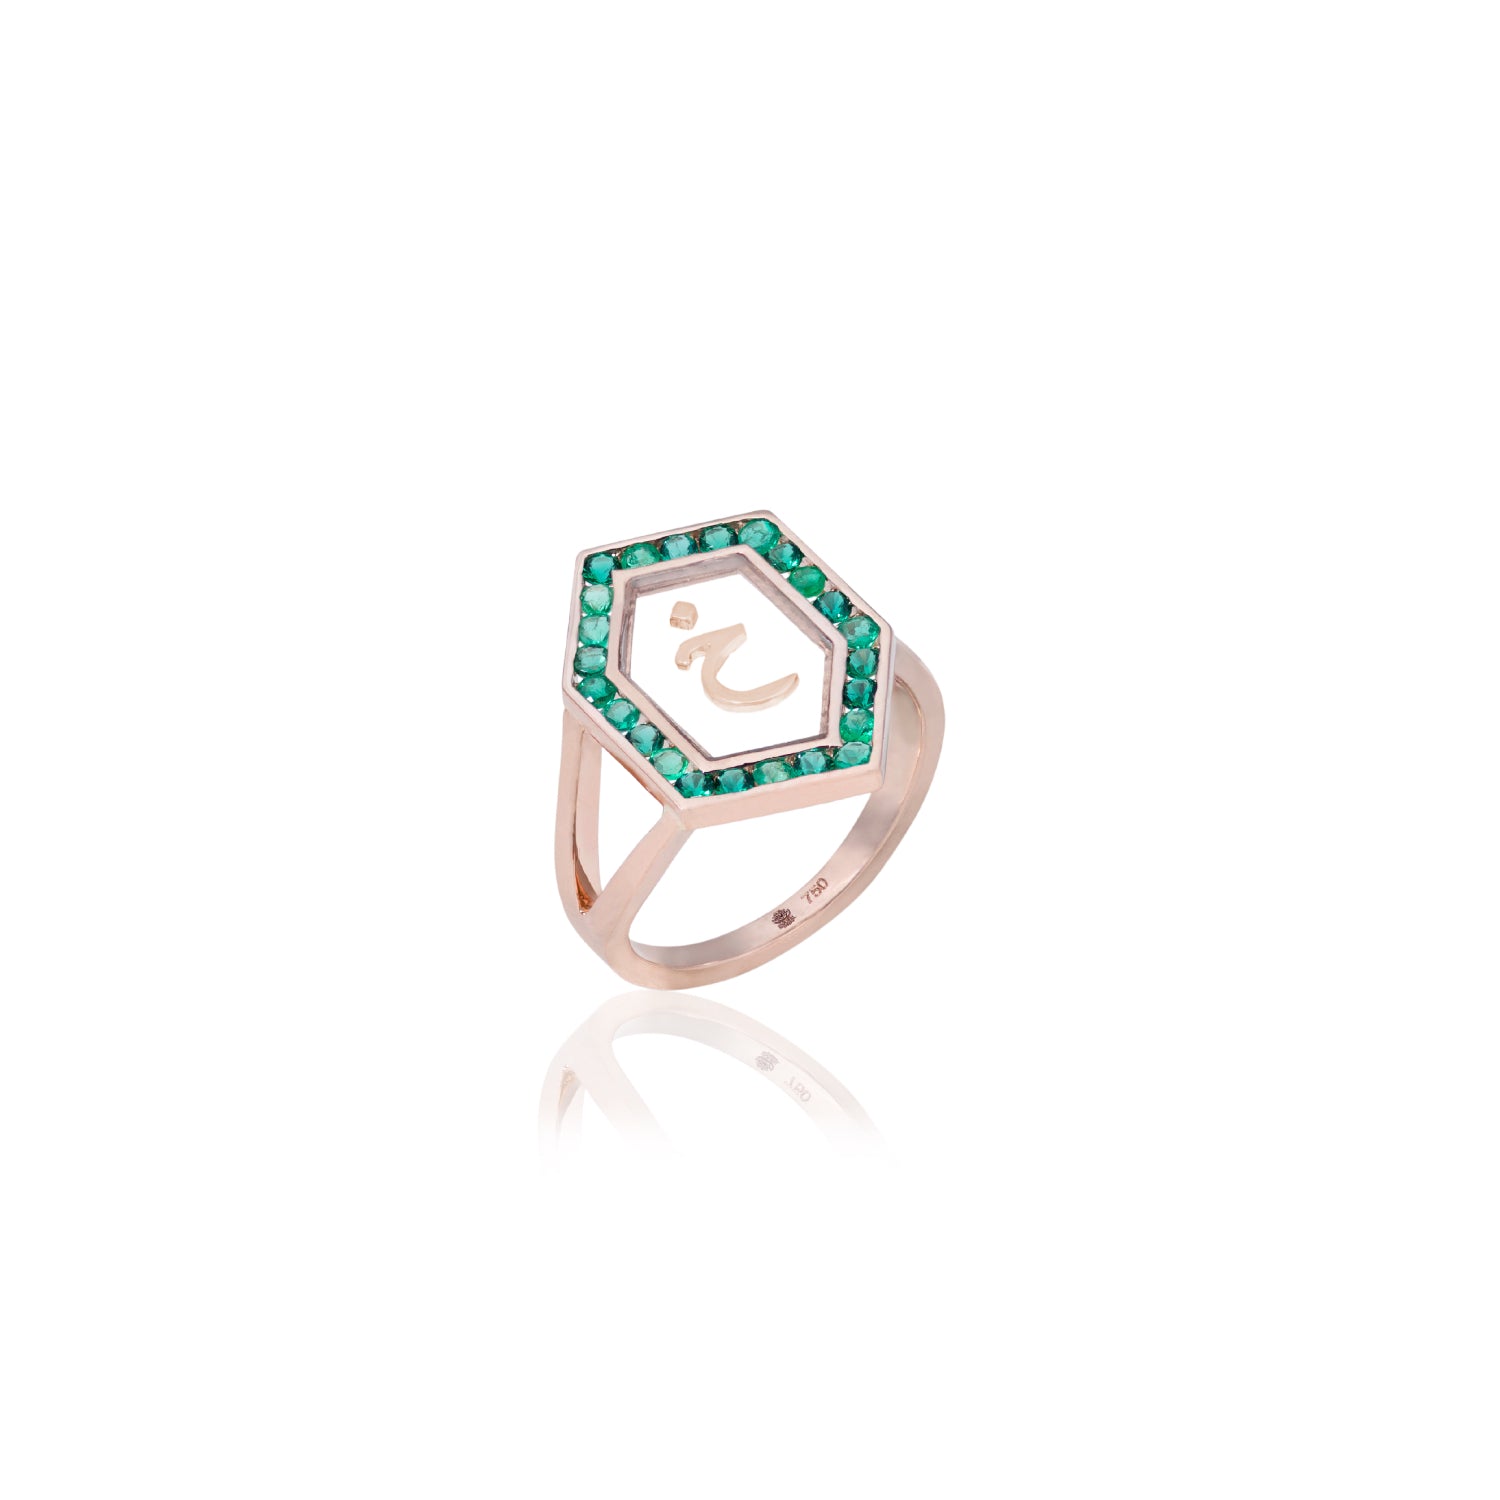 Qamoos 1.0 Letter خ Emerald Ring in Rose Gold